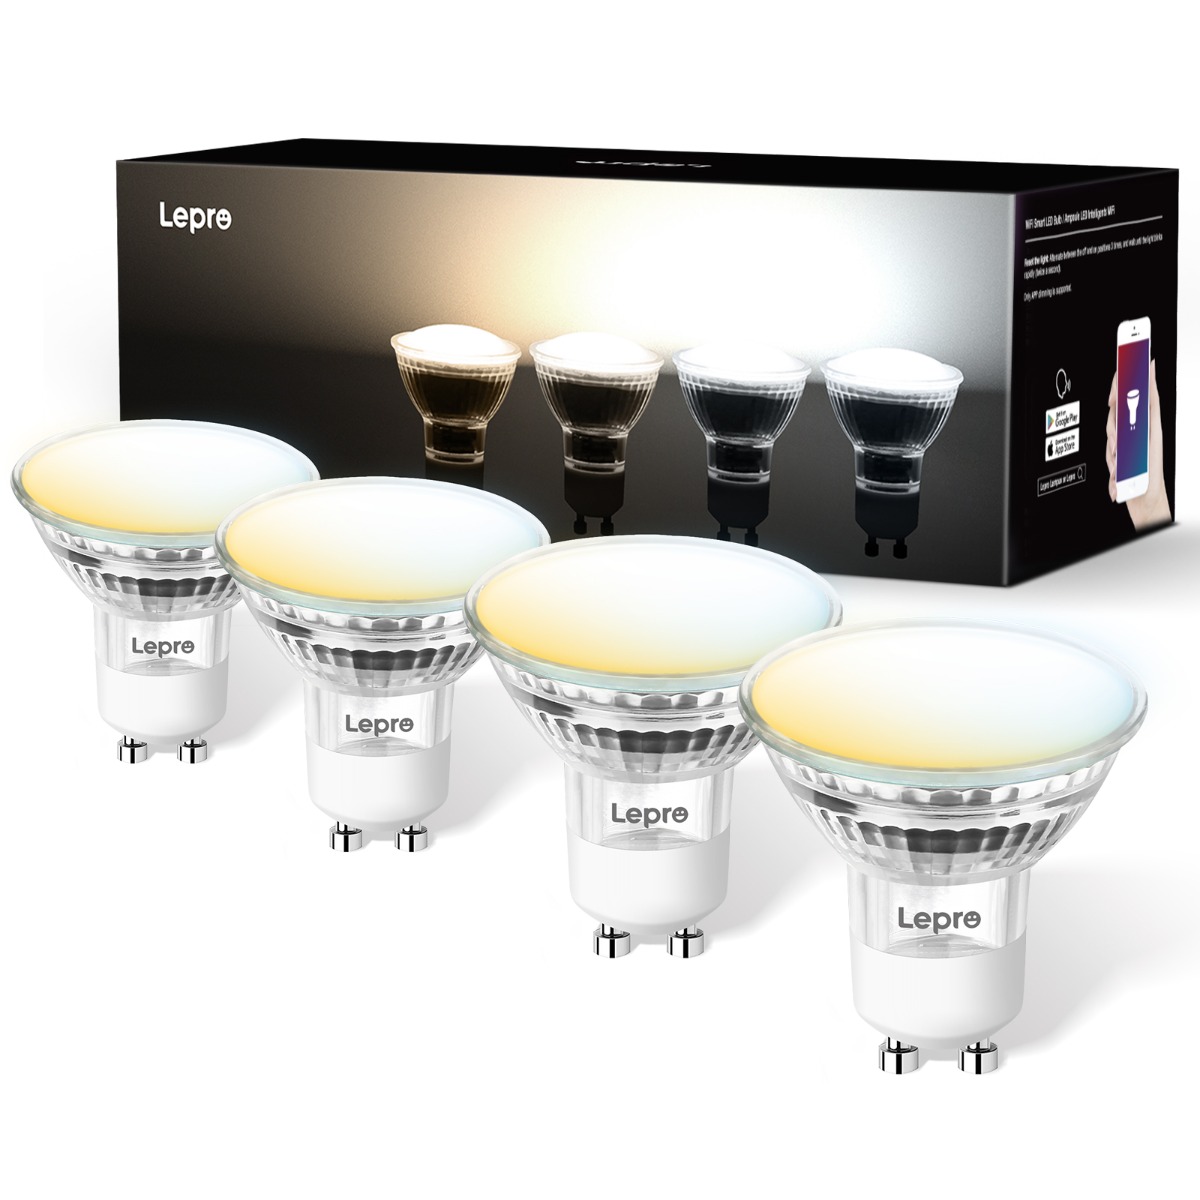 Bulbs, Spotlight Compatible 4.5W 385lm, 50W, Smart to with Cool 2700K-6500K, Light 4 Lepro Pack GU10, Bulb WiFi Home, Smart Google Alexa LED Warm of Dimmable Bulb, White and =